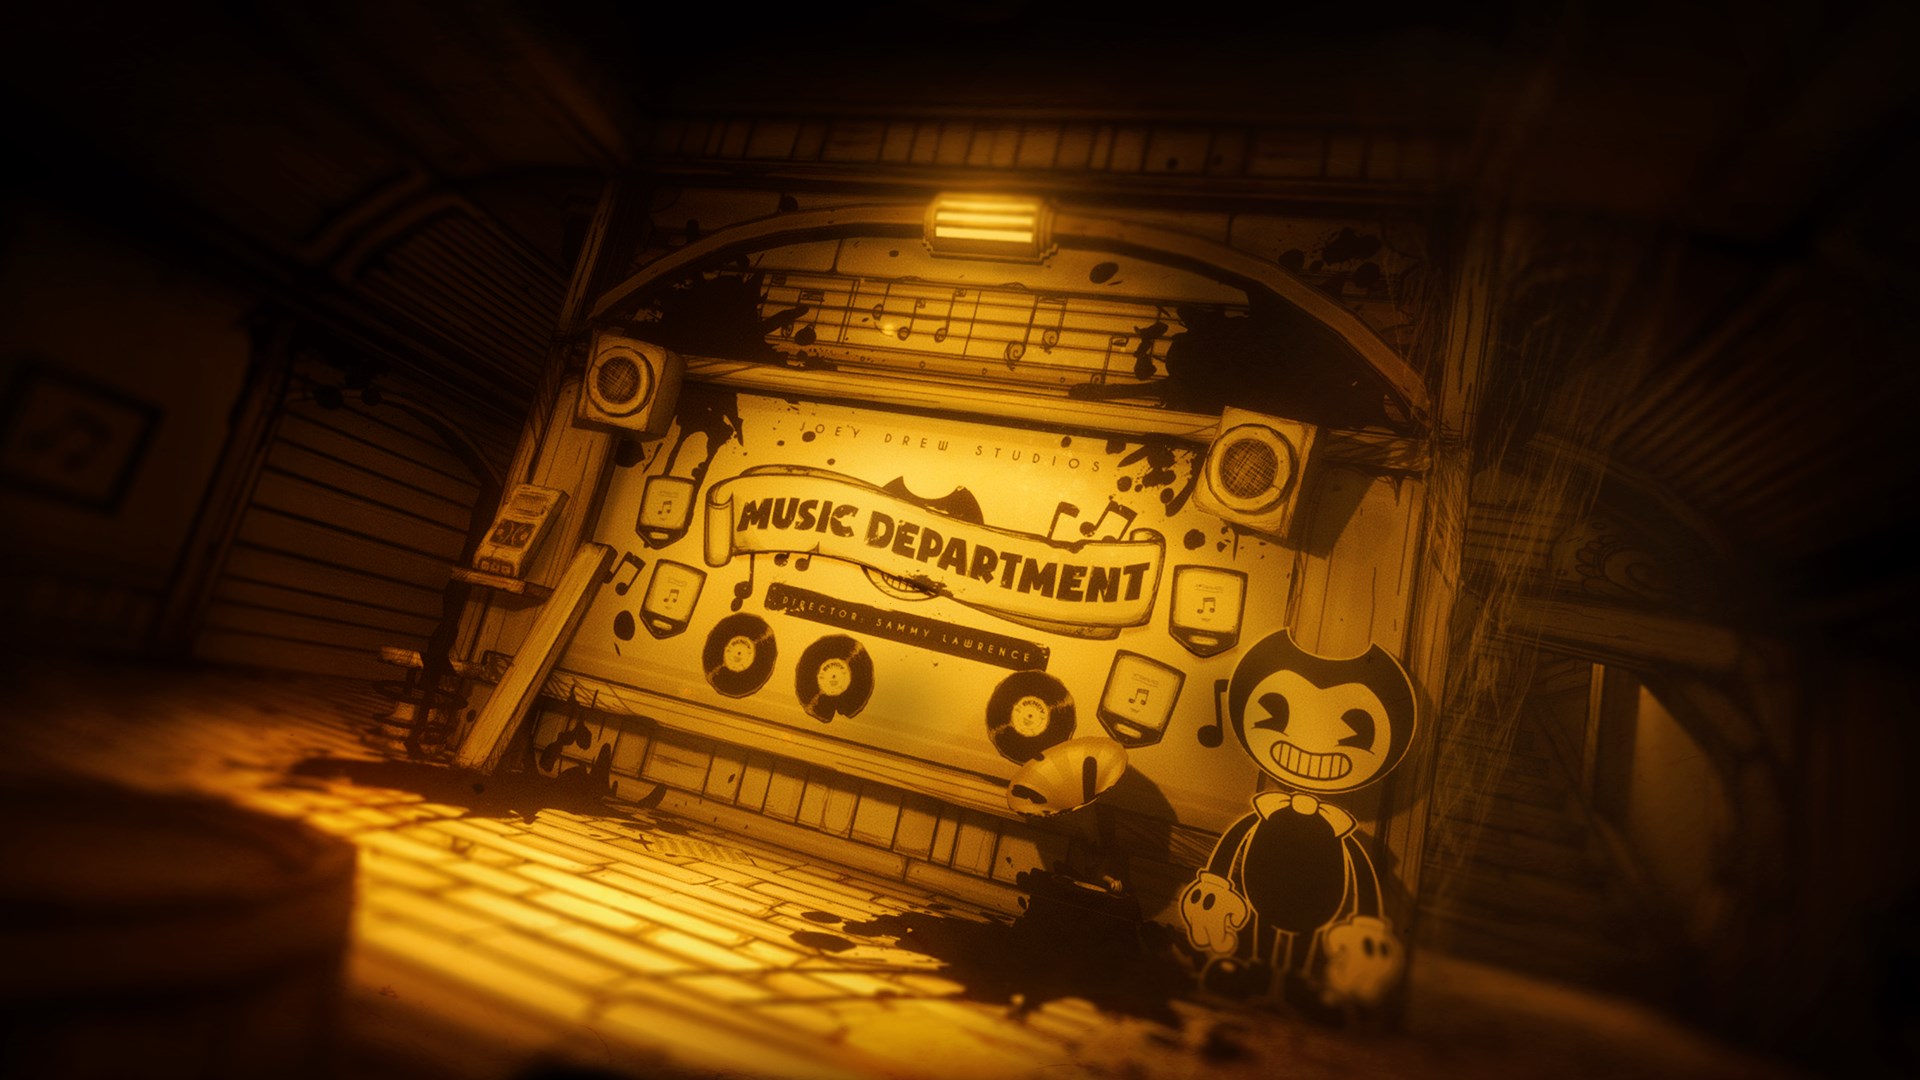 bendy and the ink machine xbox